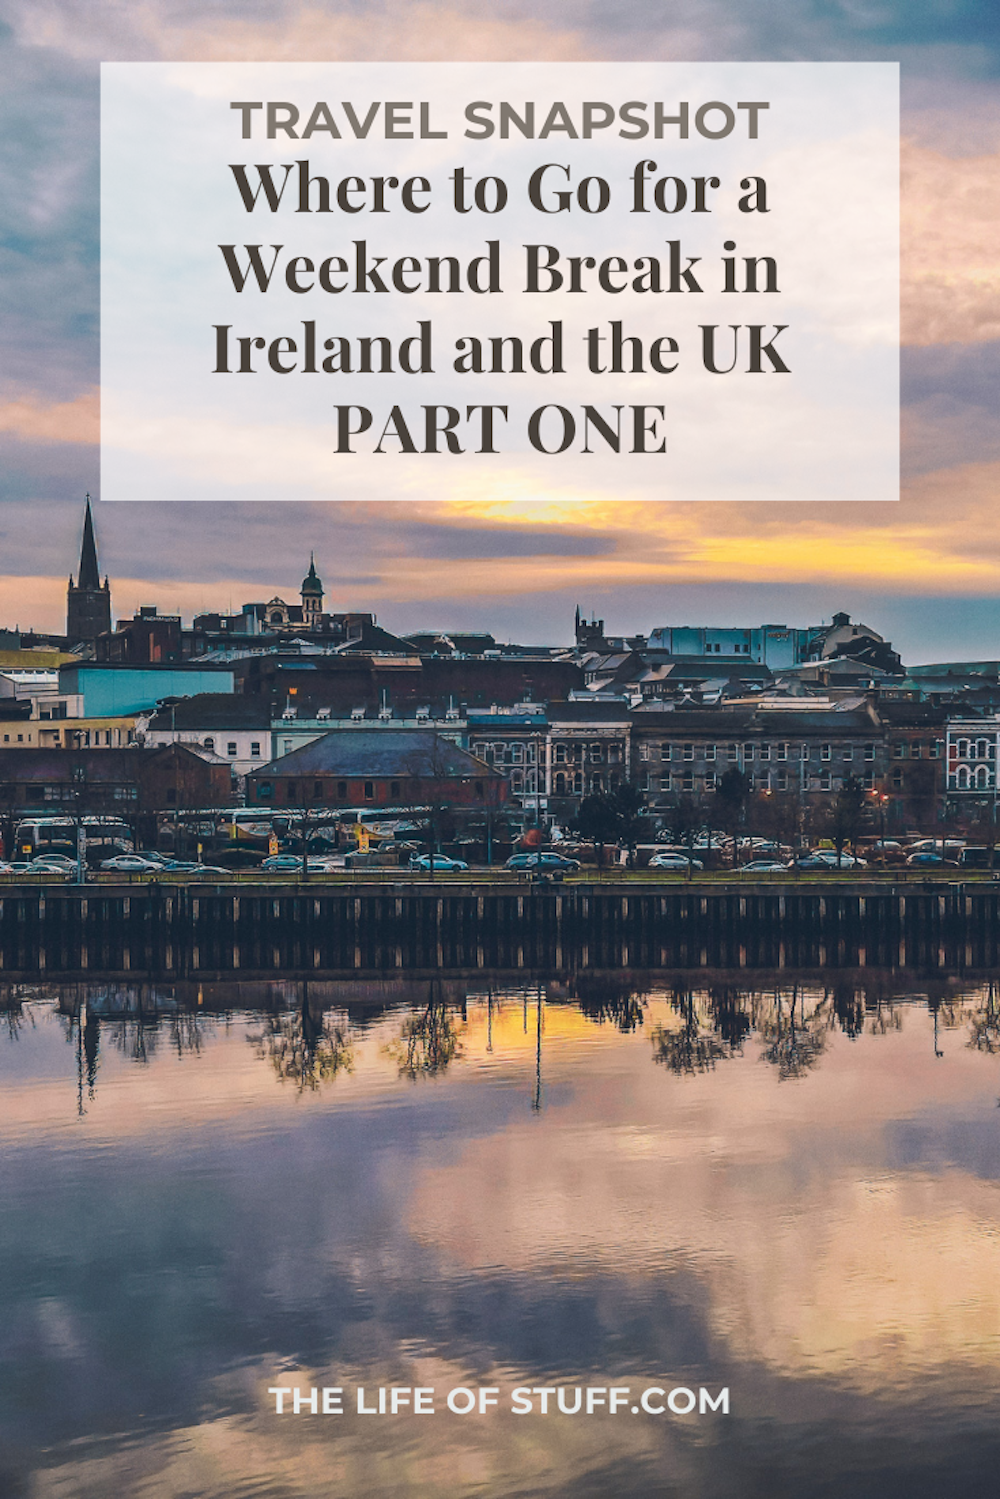 Where to Go for a Weekend Break in Ireland and the UK Part 1 - The Life of Stuff